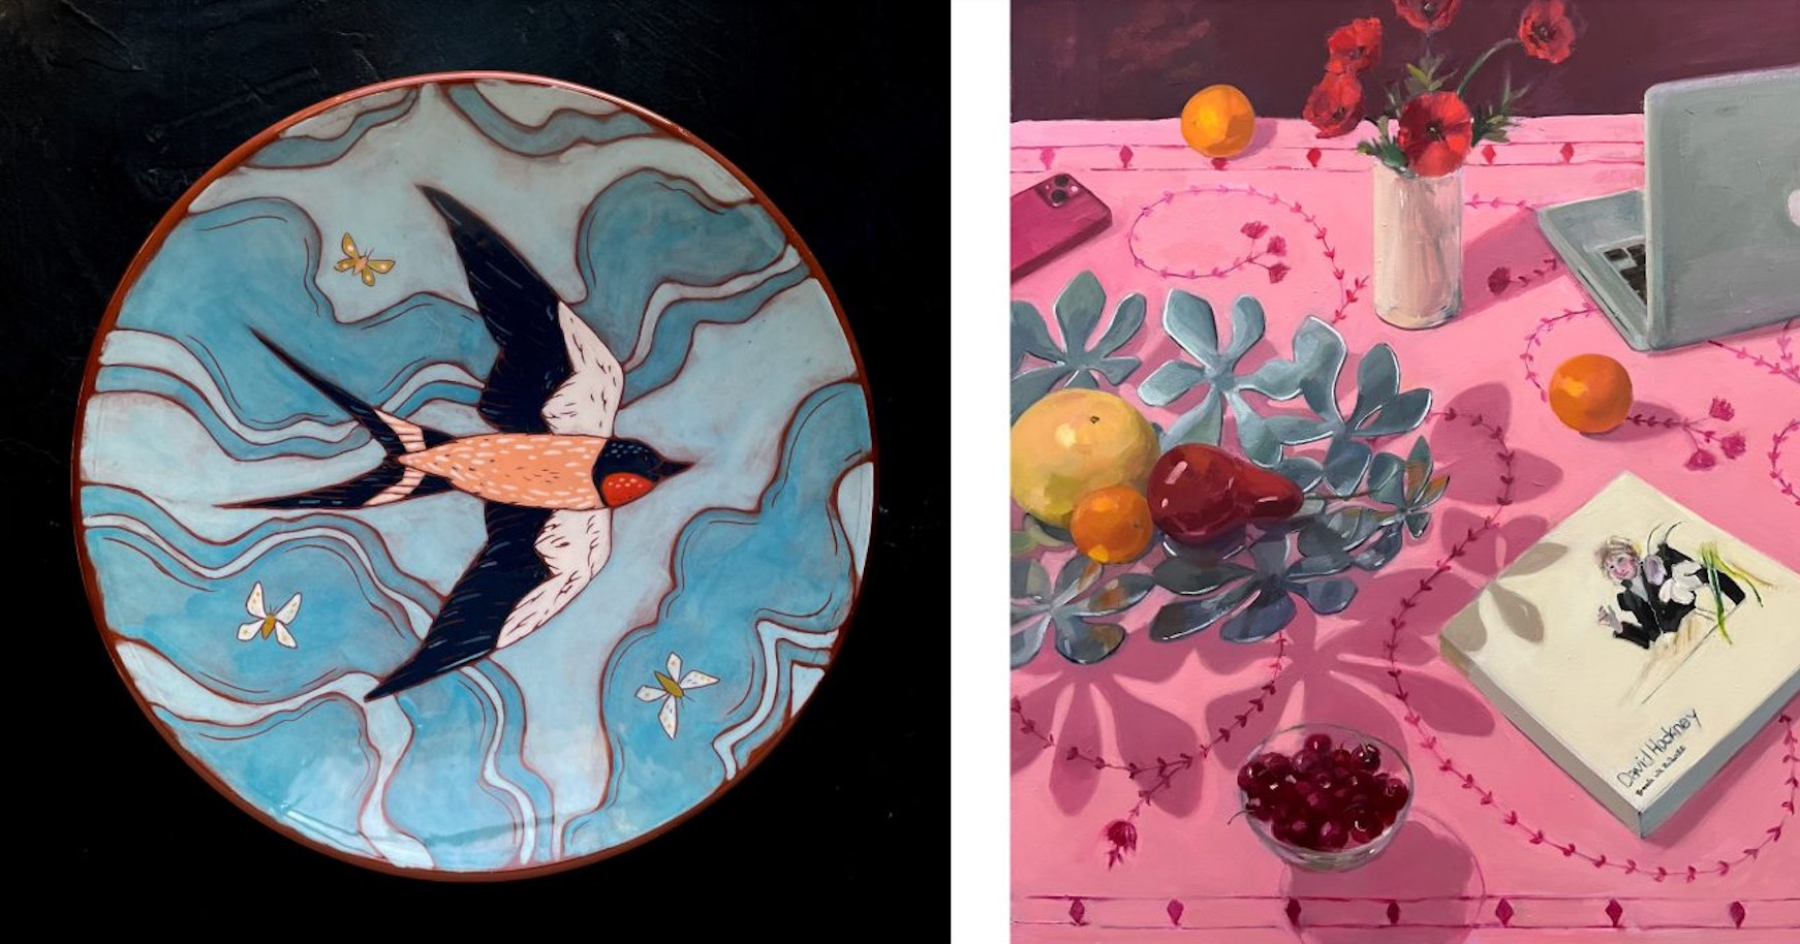 A blue and white ceramic plate is painted with a black and white bird in flight and next to that is a painting of a pink tablecloth with a bowl of fruit, a book, a laptop, and a vase of red flowers.